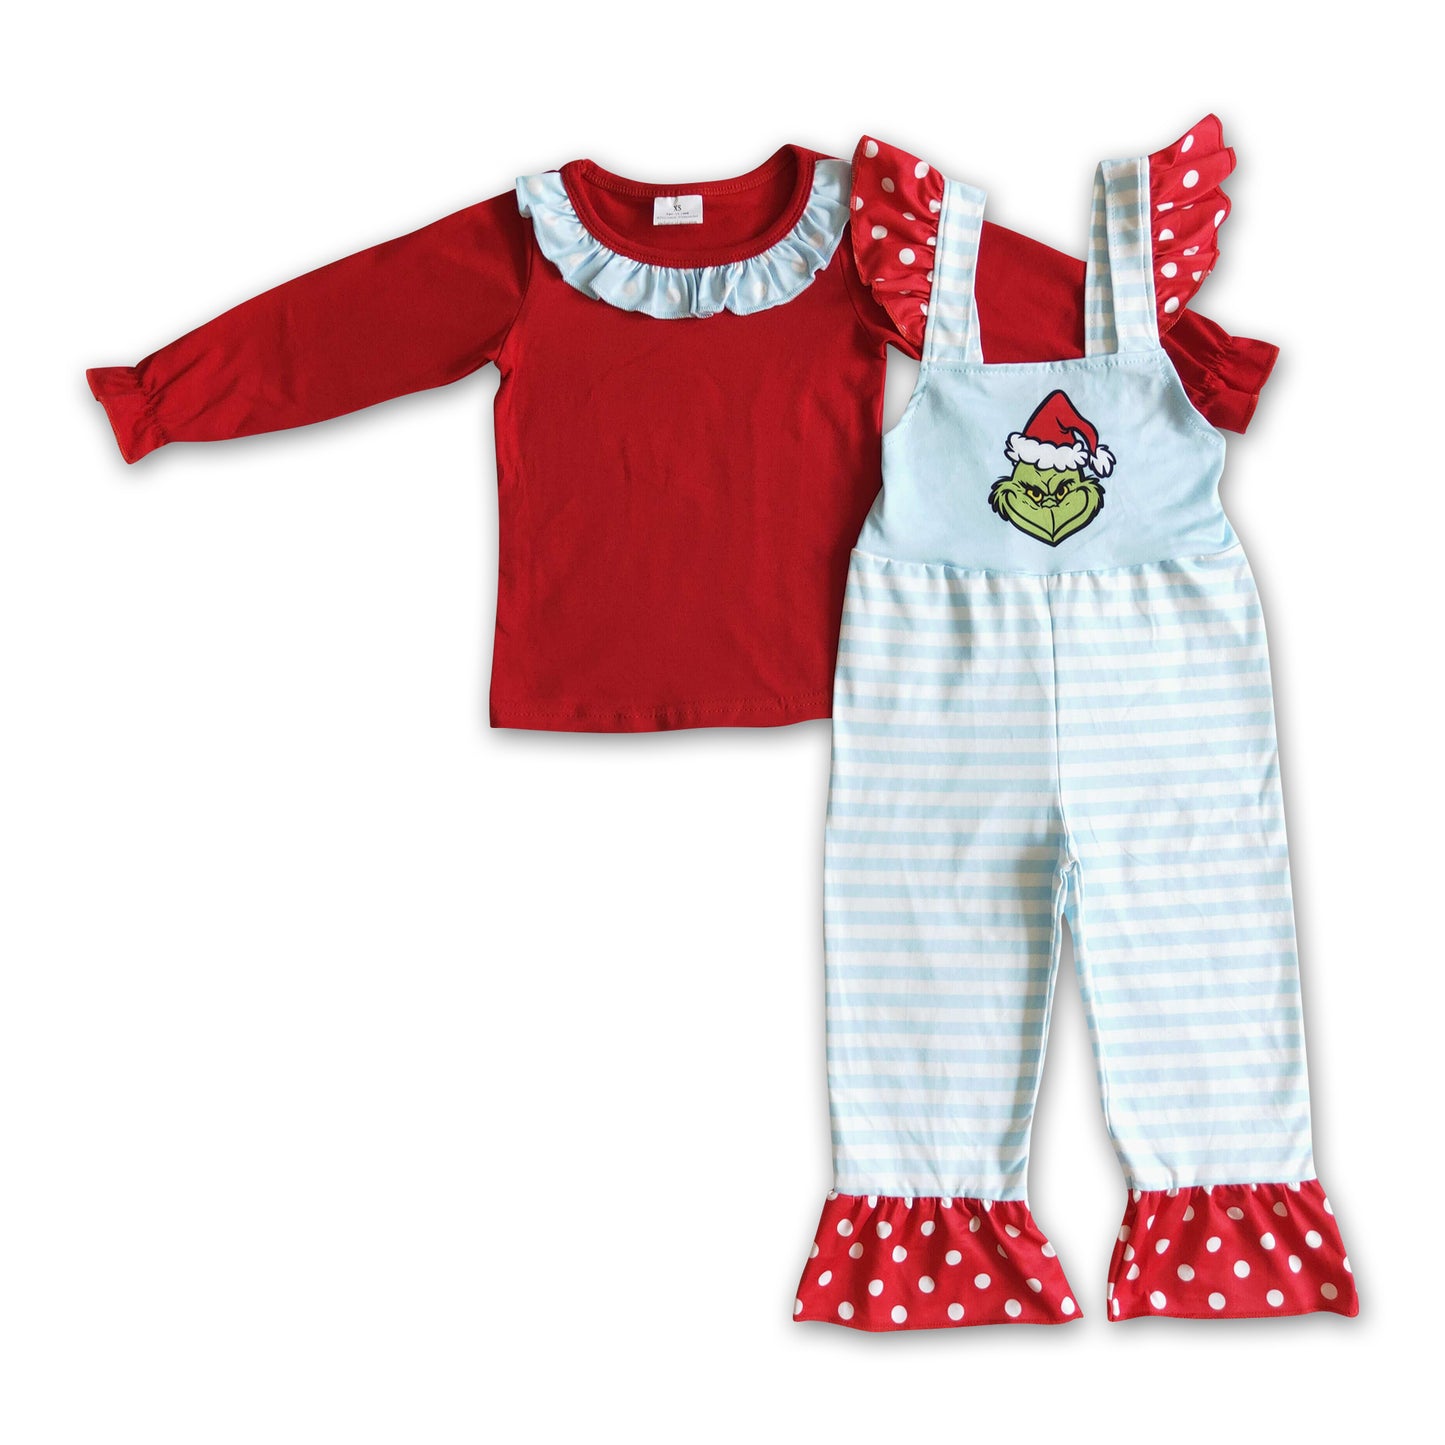 Red cotton top green face stripe overalls kids Christmas set